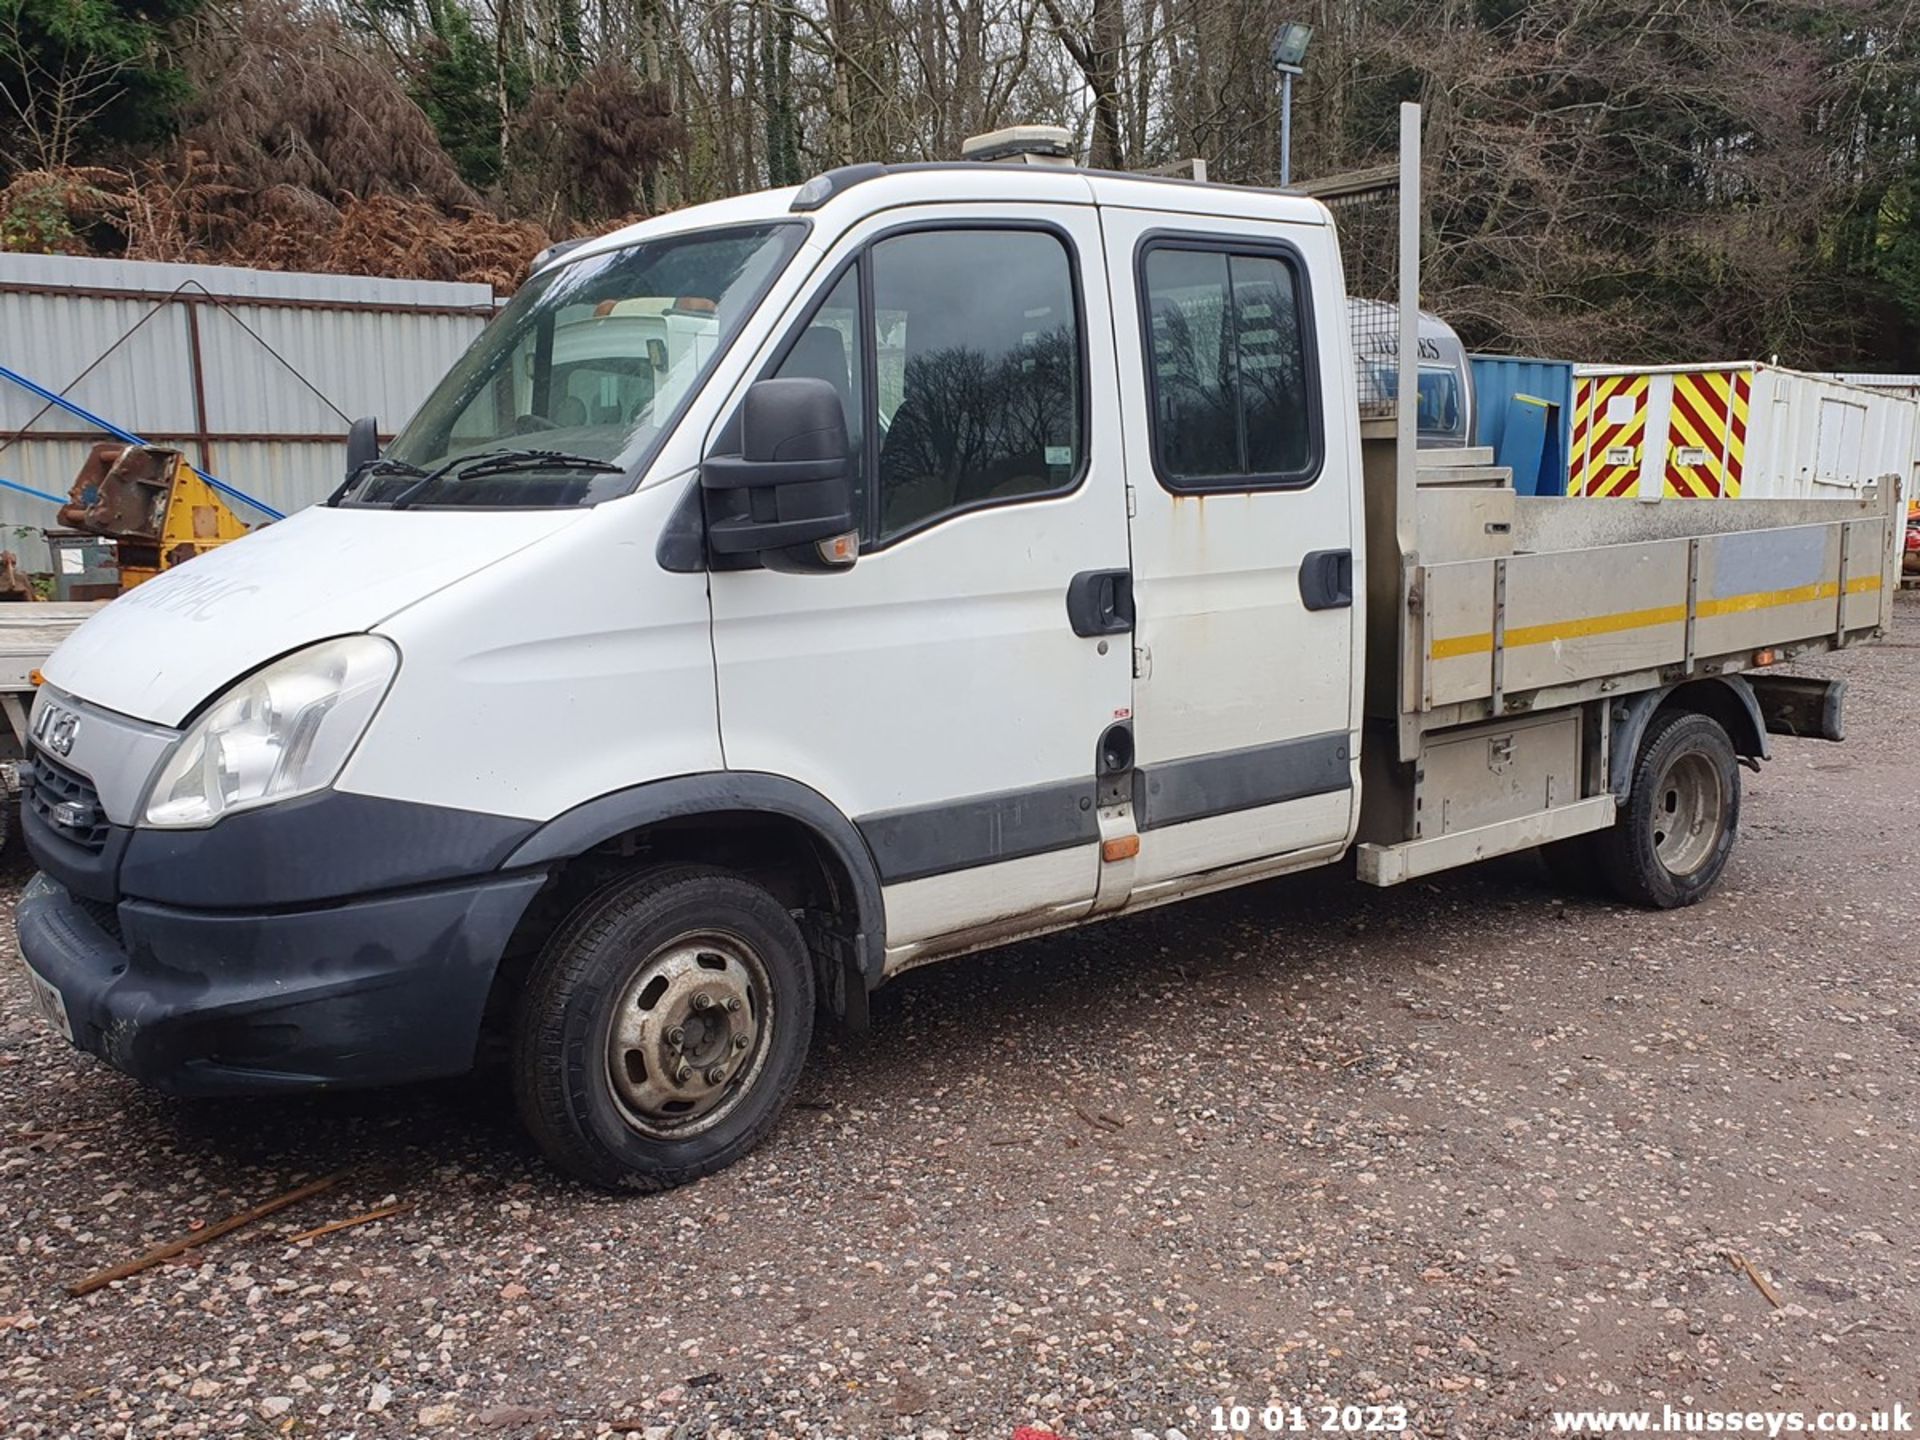 14/64 IVECO DAILY 50C15 - 2998cc 4dr Tipper (White, 108k)